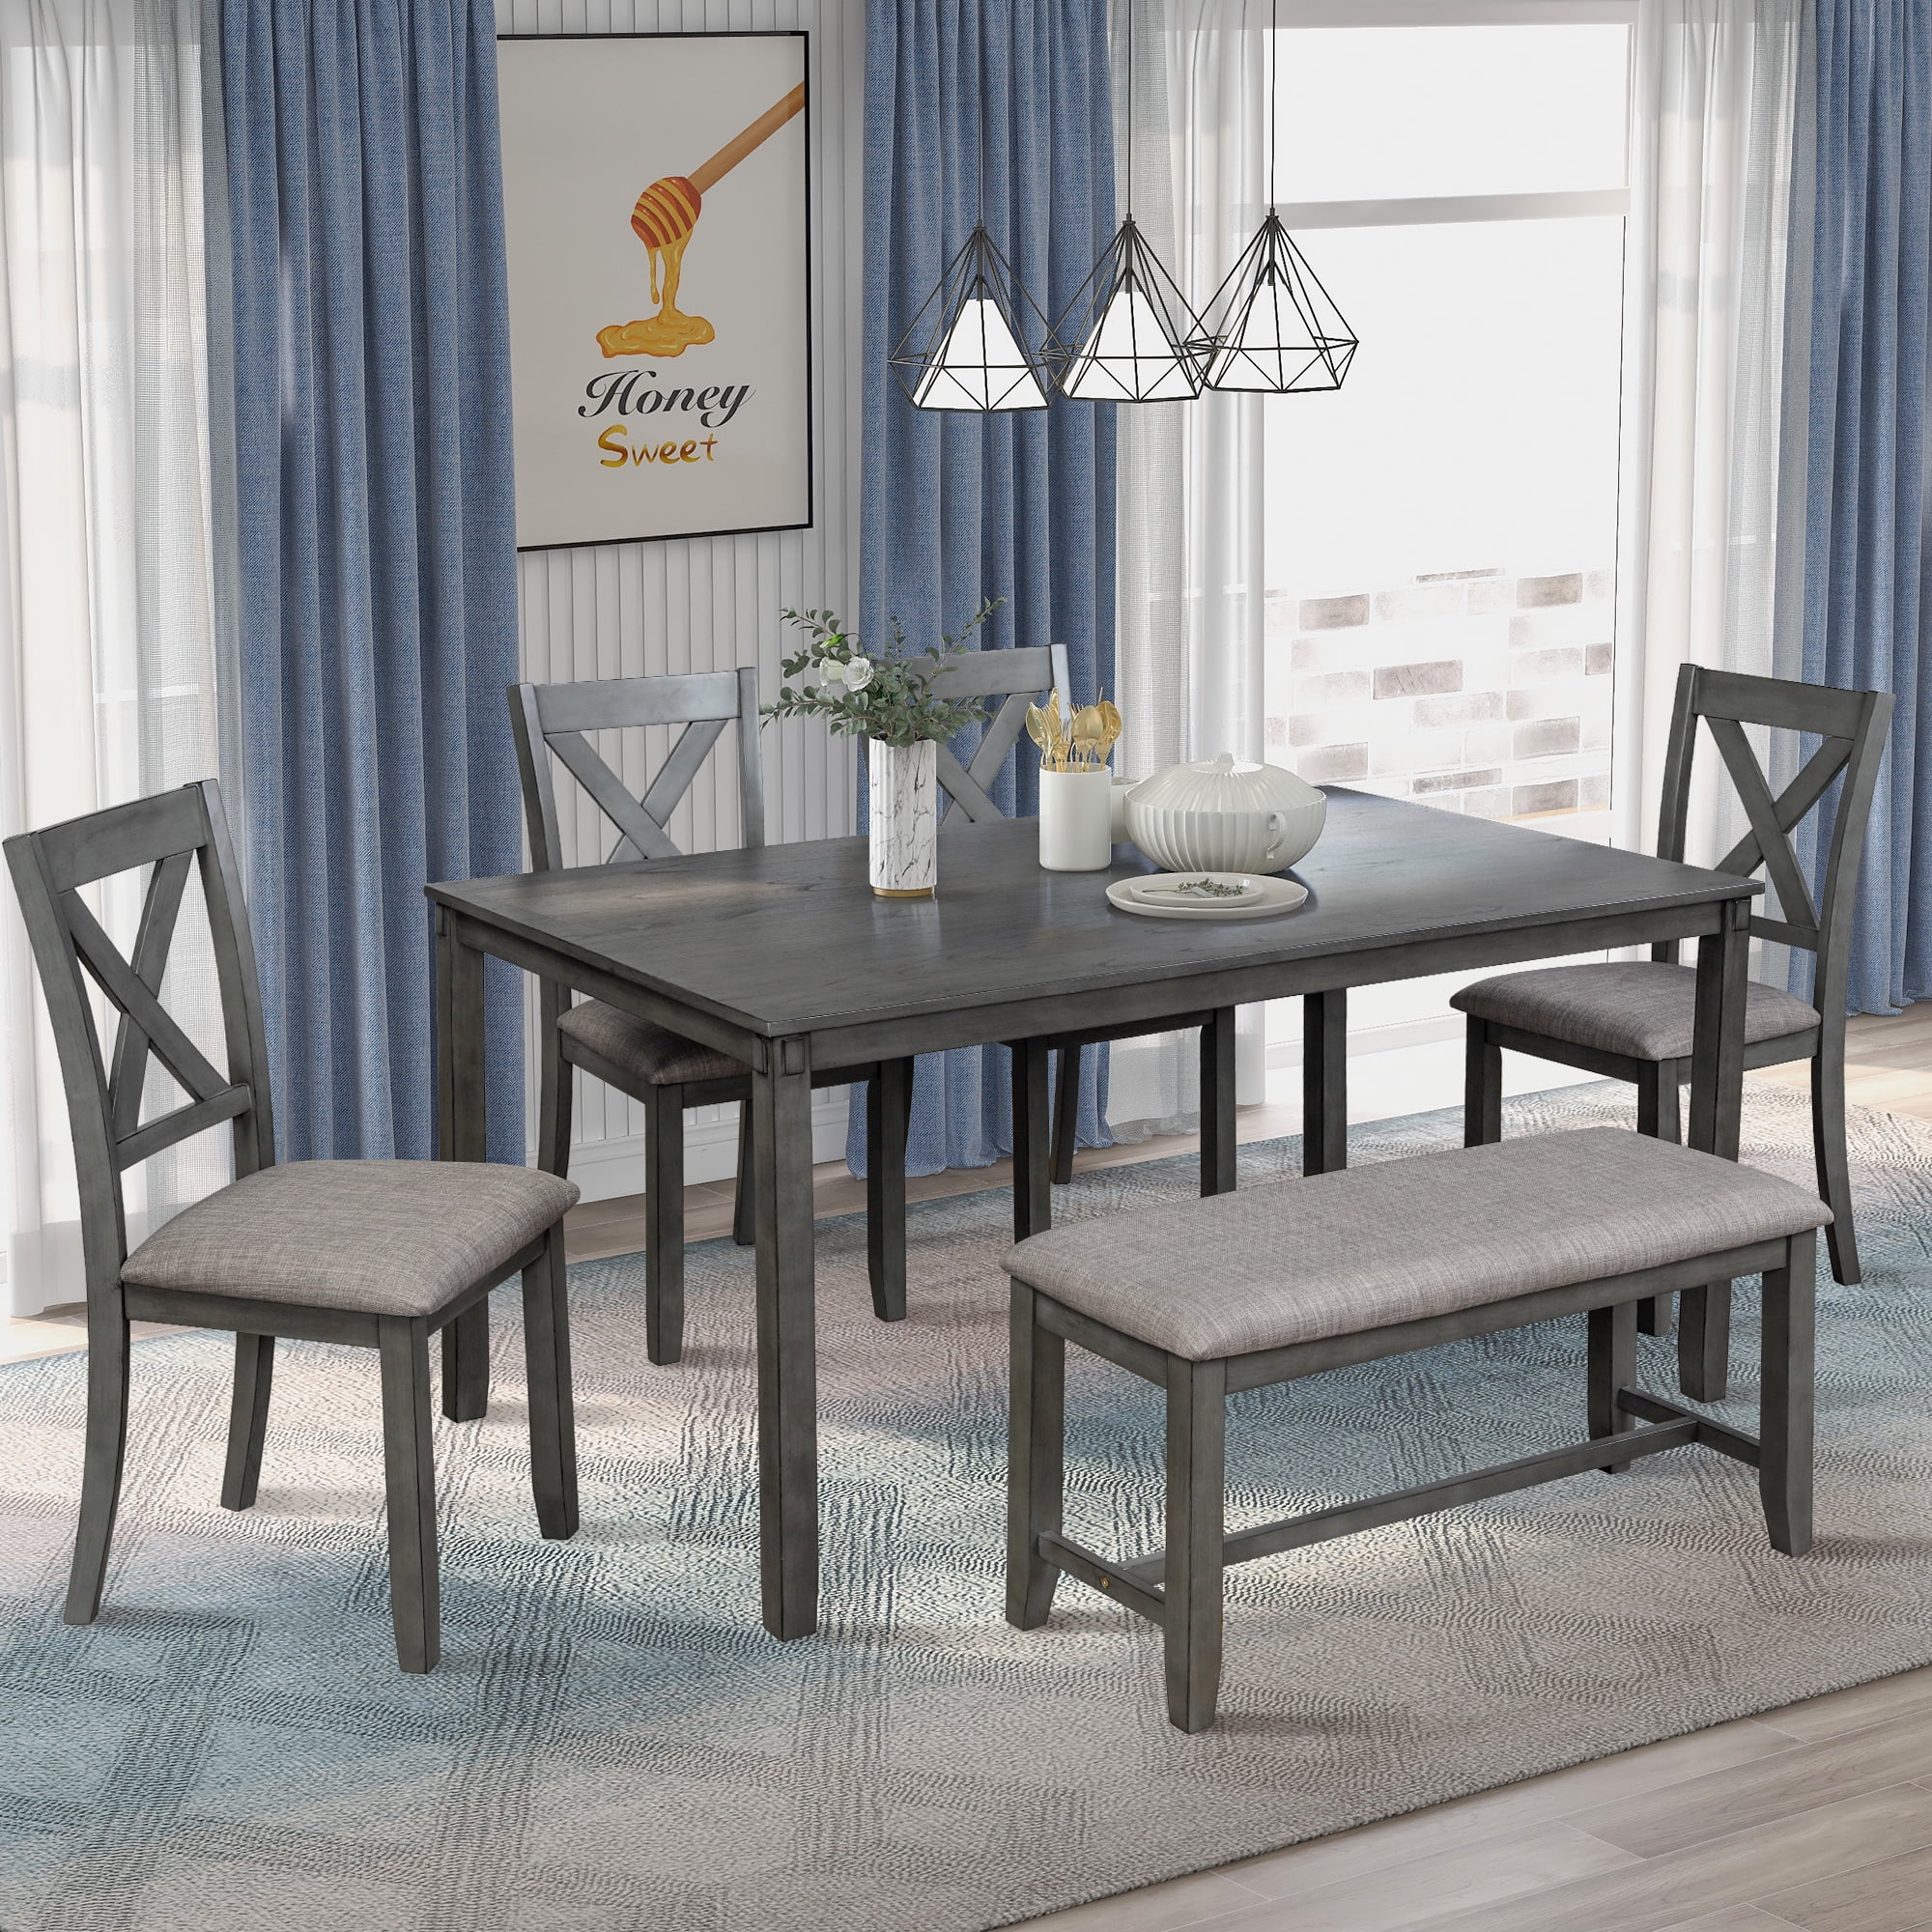 6 Piece Dining Table Set Modern Home, 6 Dining Room Table And Chairs